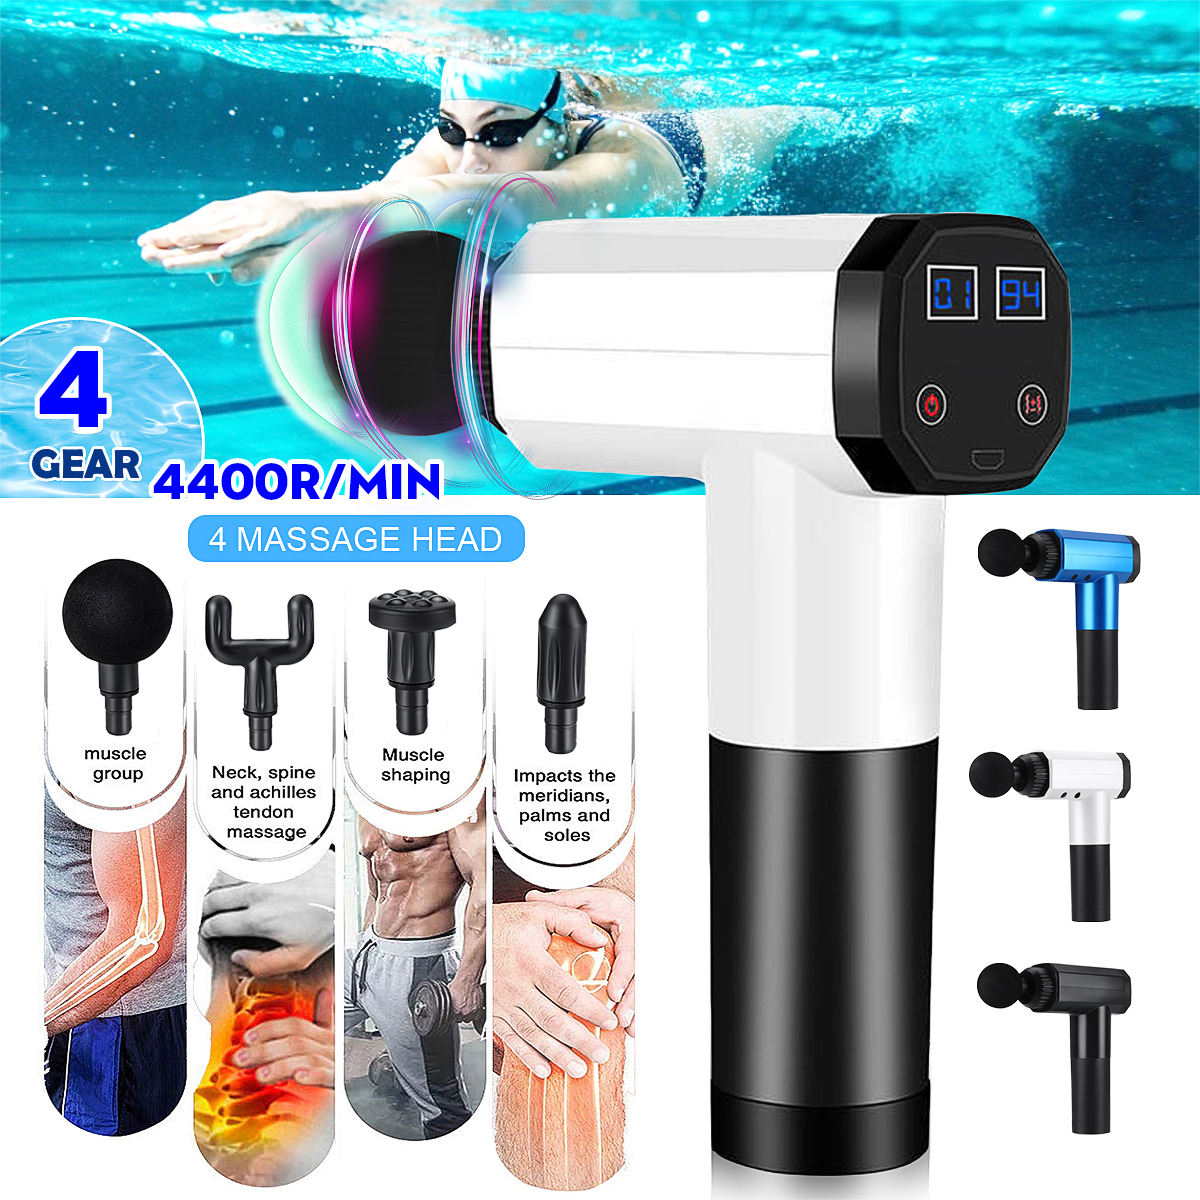 80W-Smart-Touch-LED-Electric-Percussive-Massager-4-Gears-USB-Rechargeable-Deep-Muscle-Shock-Vibratio-1693756-2